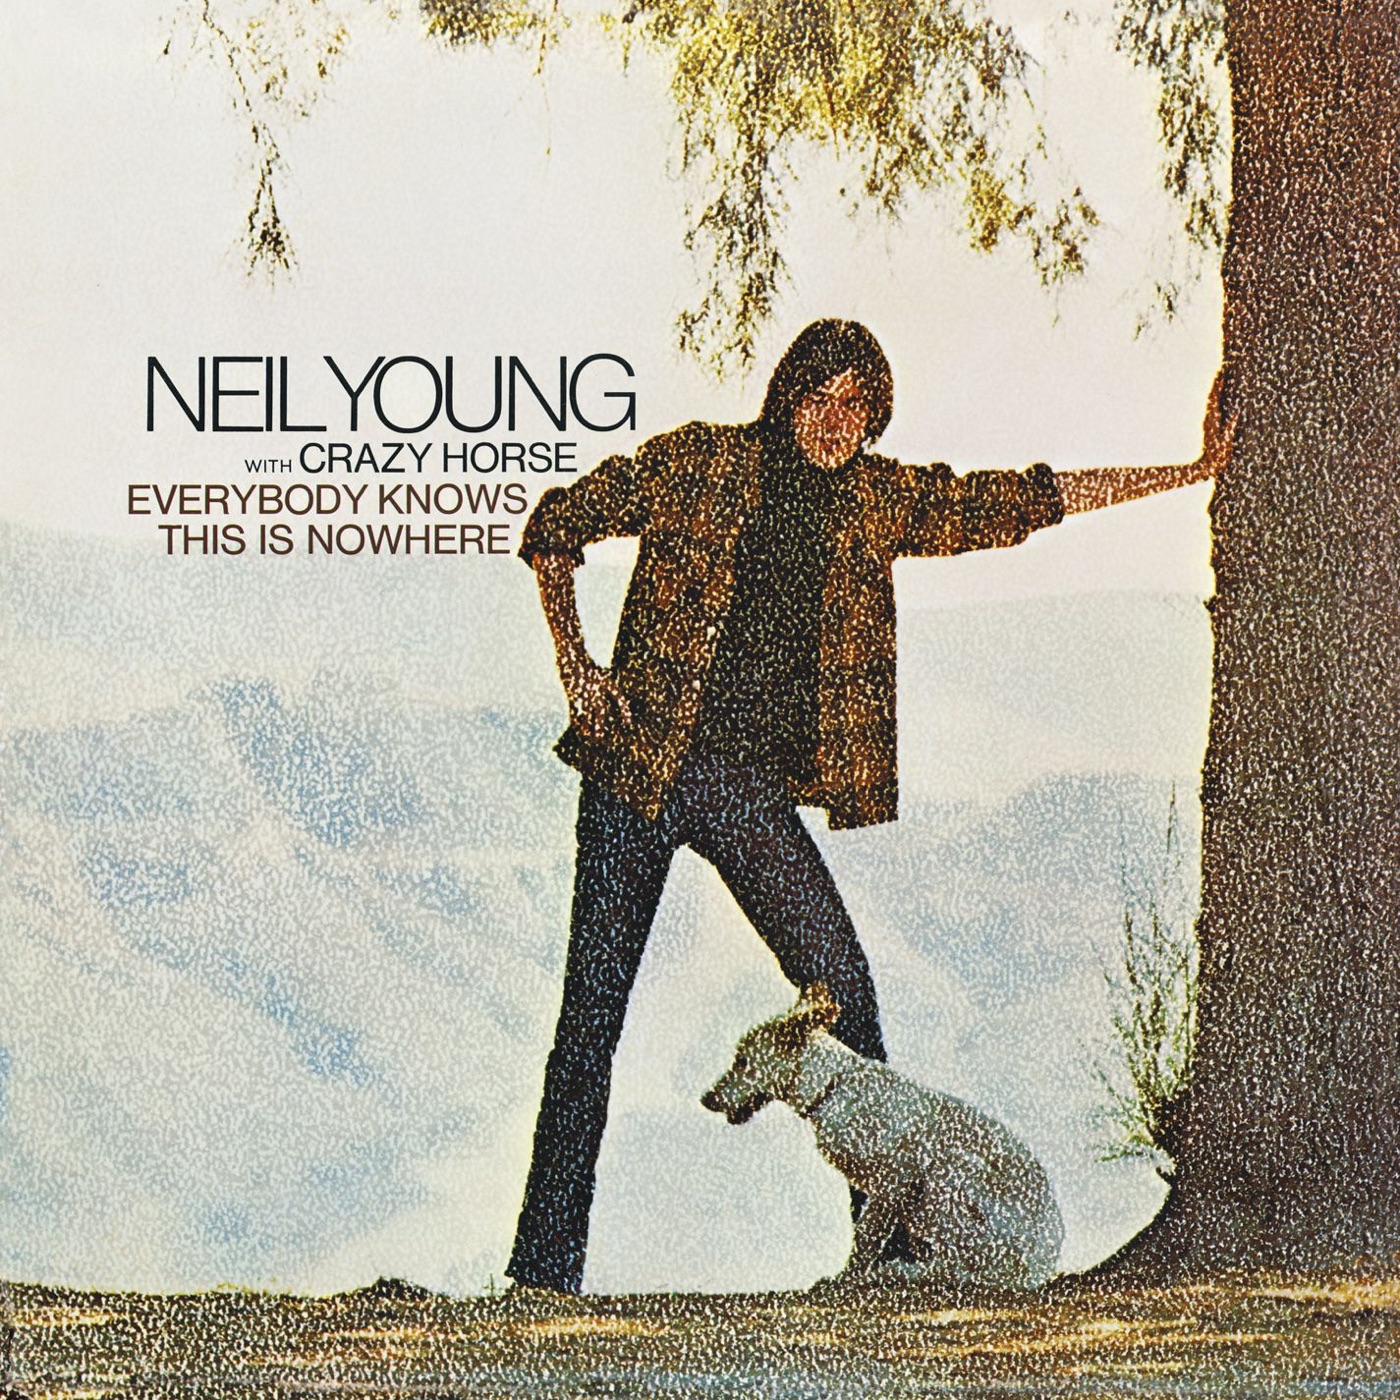 Everybody Knows This Is Nowhere by Neil Young & Crazy Horse, Neil Young, Crazy Horse